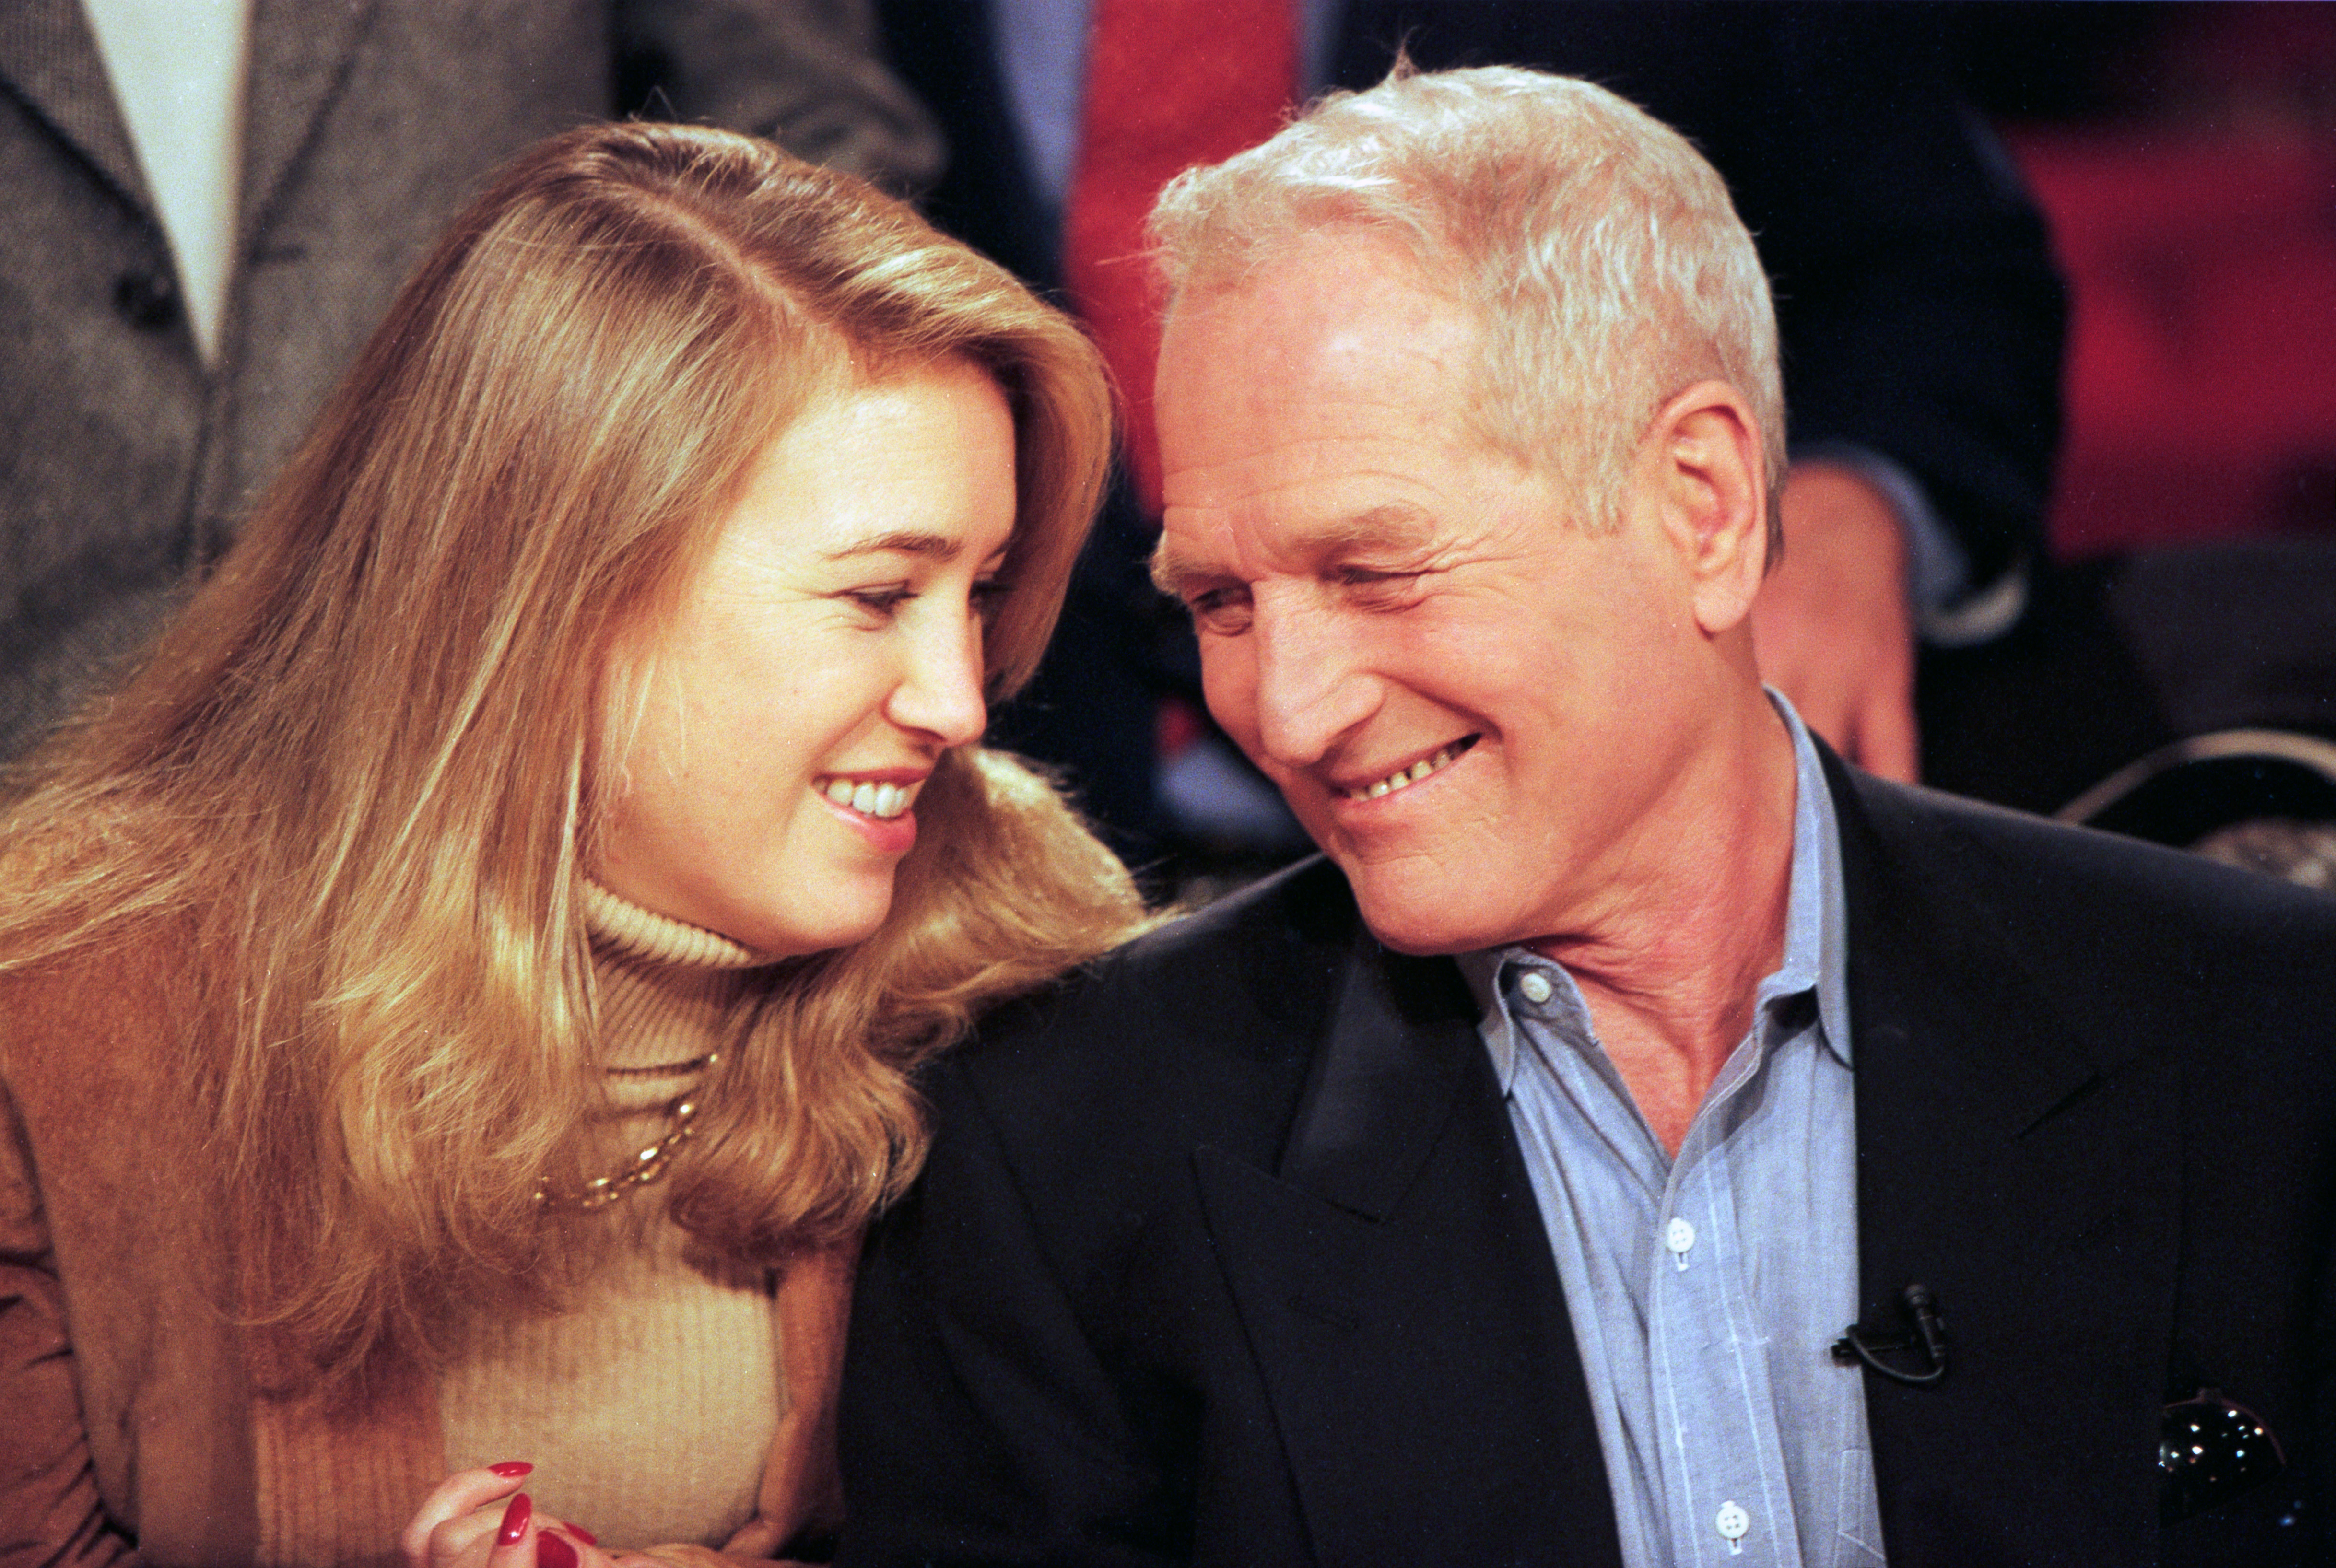 Paul Newman and Claire Olivia Newman at "La Marche du Siecle" TV show on February 20, 1996, in Paris, France. | Source: Getty Images